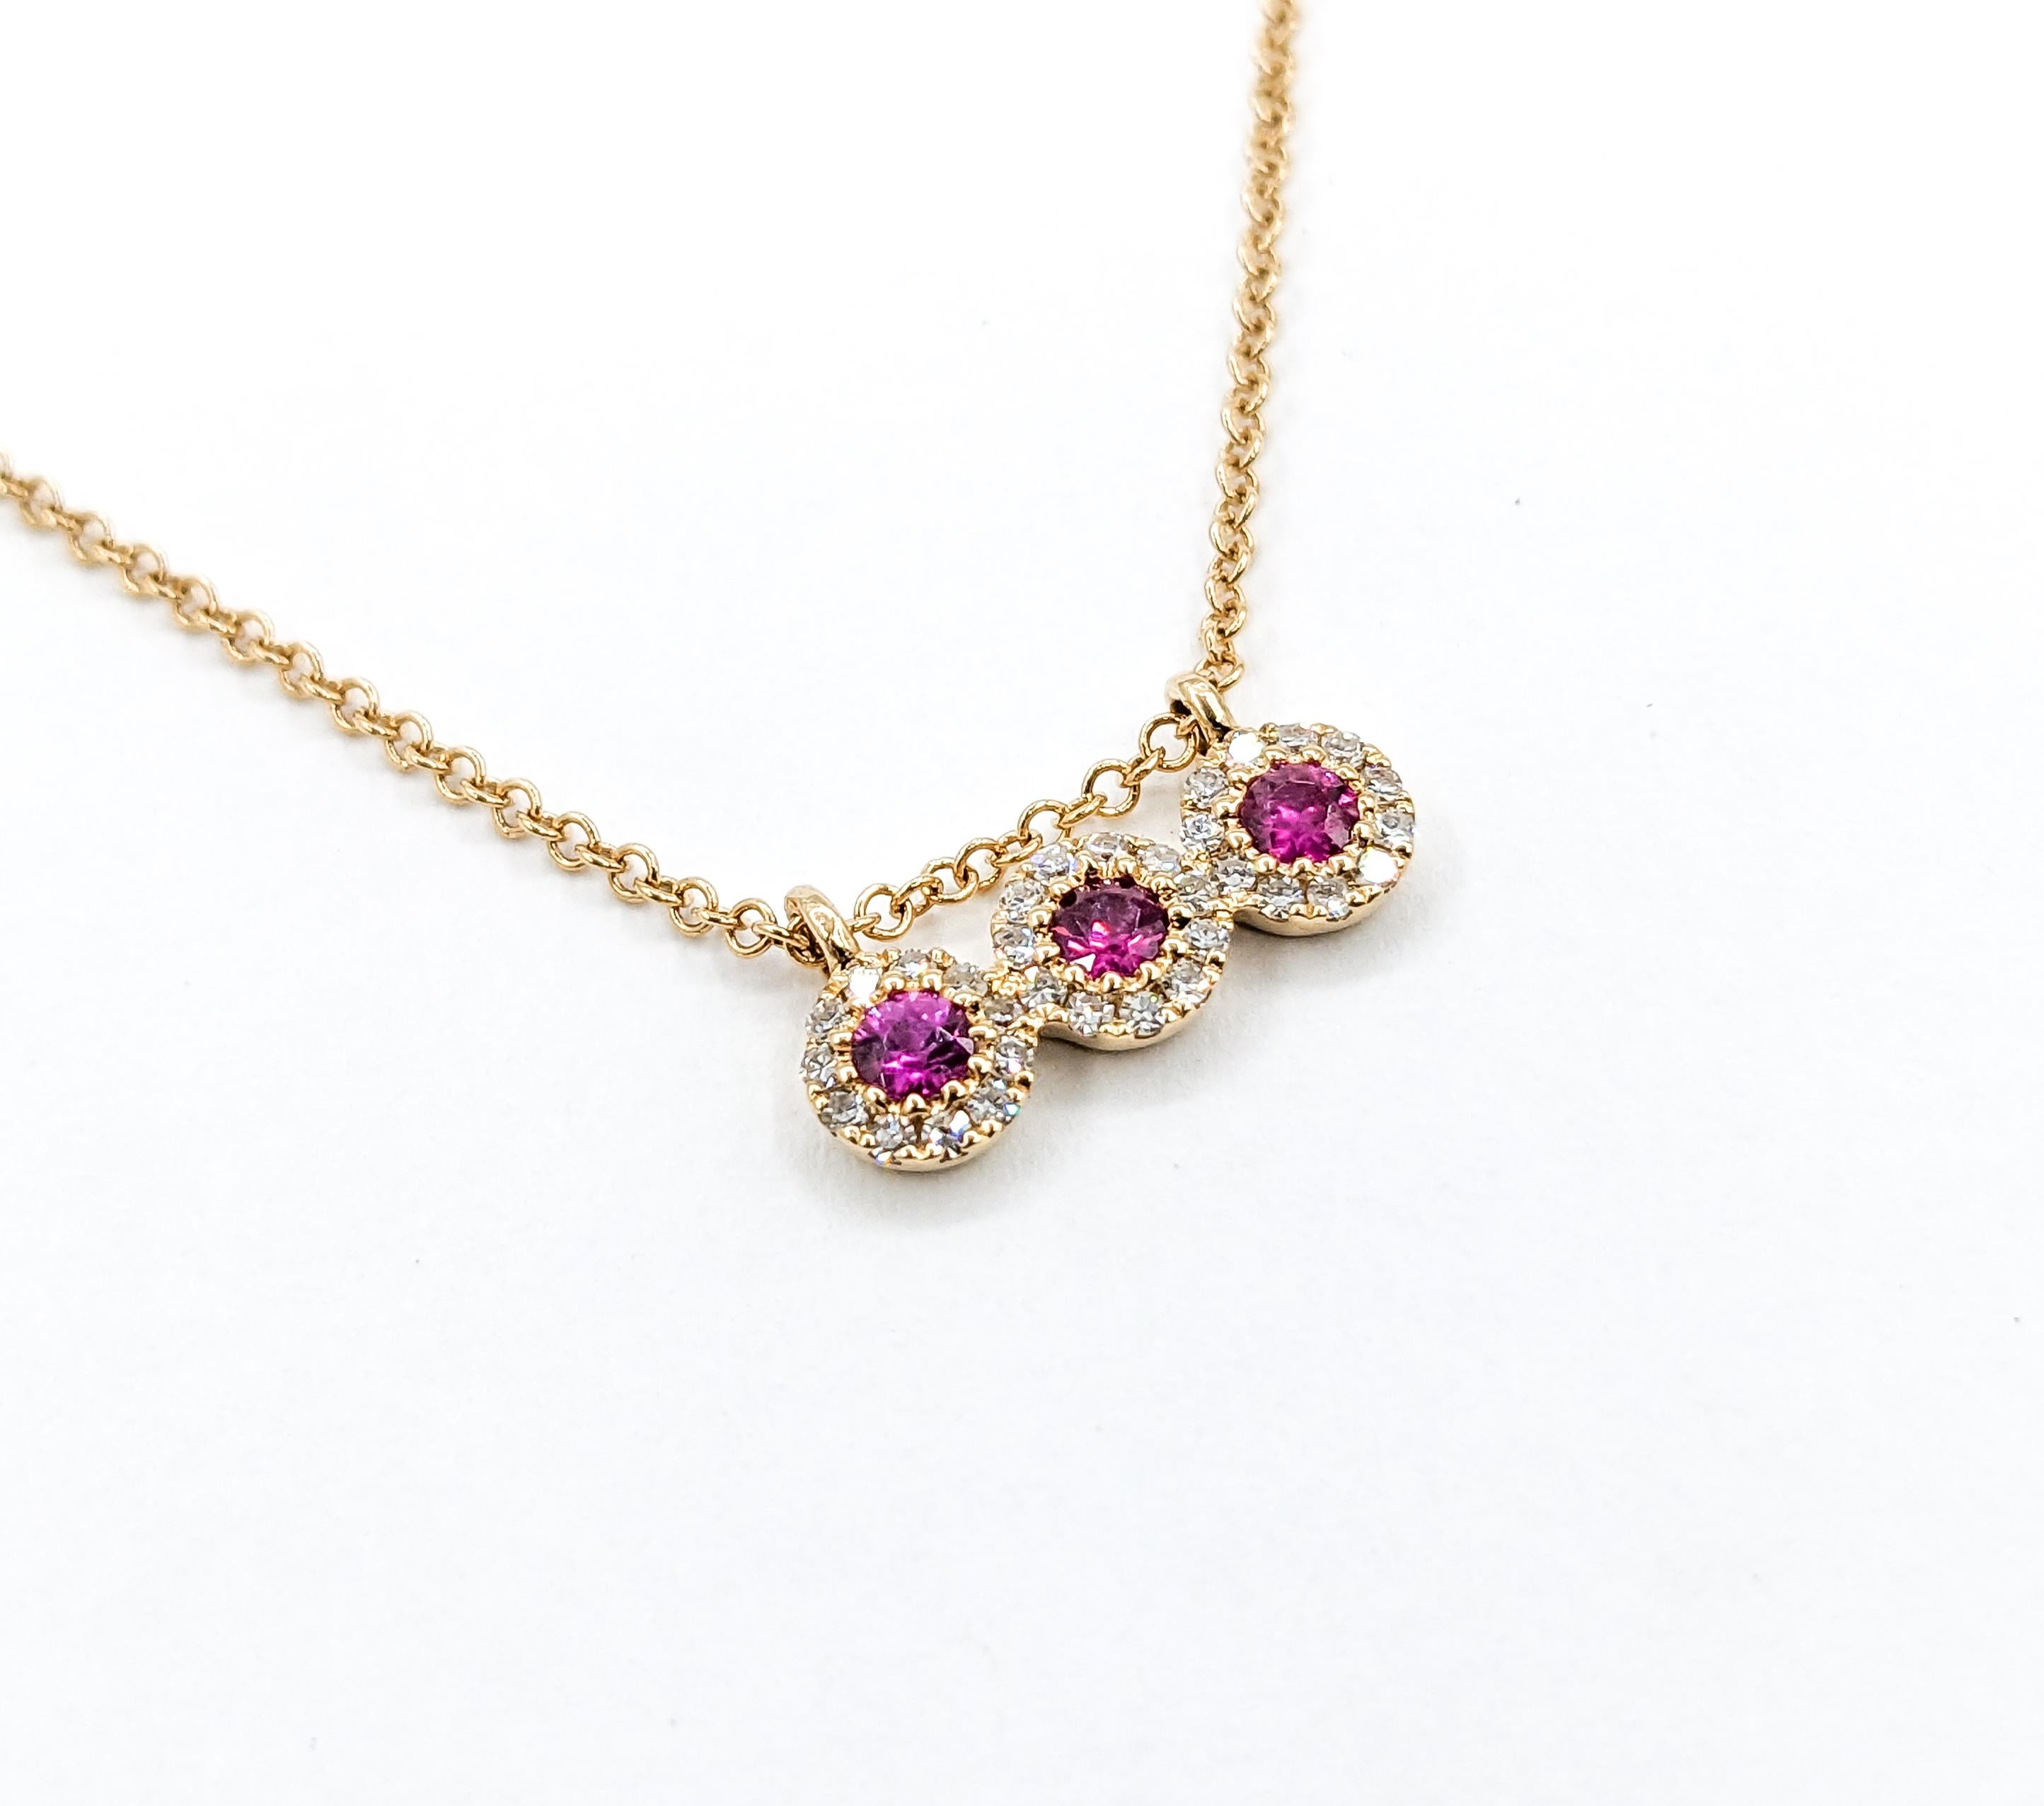  Ruby & Diamond Necklace Bar Yellow Gold In New Condition For Sale In Bloomington, MN